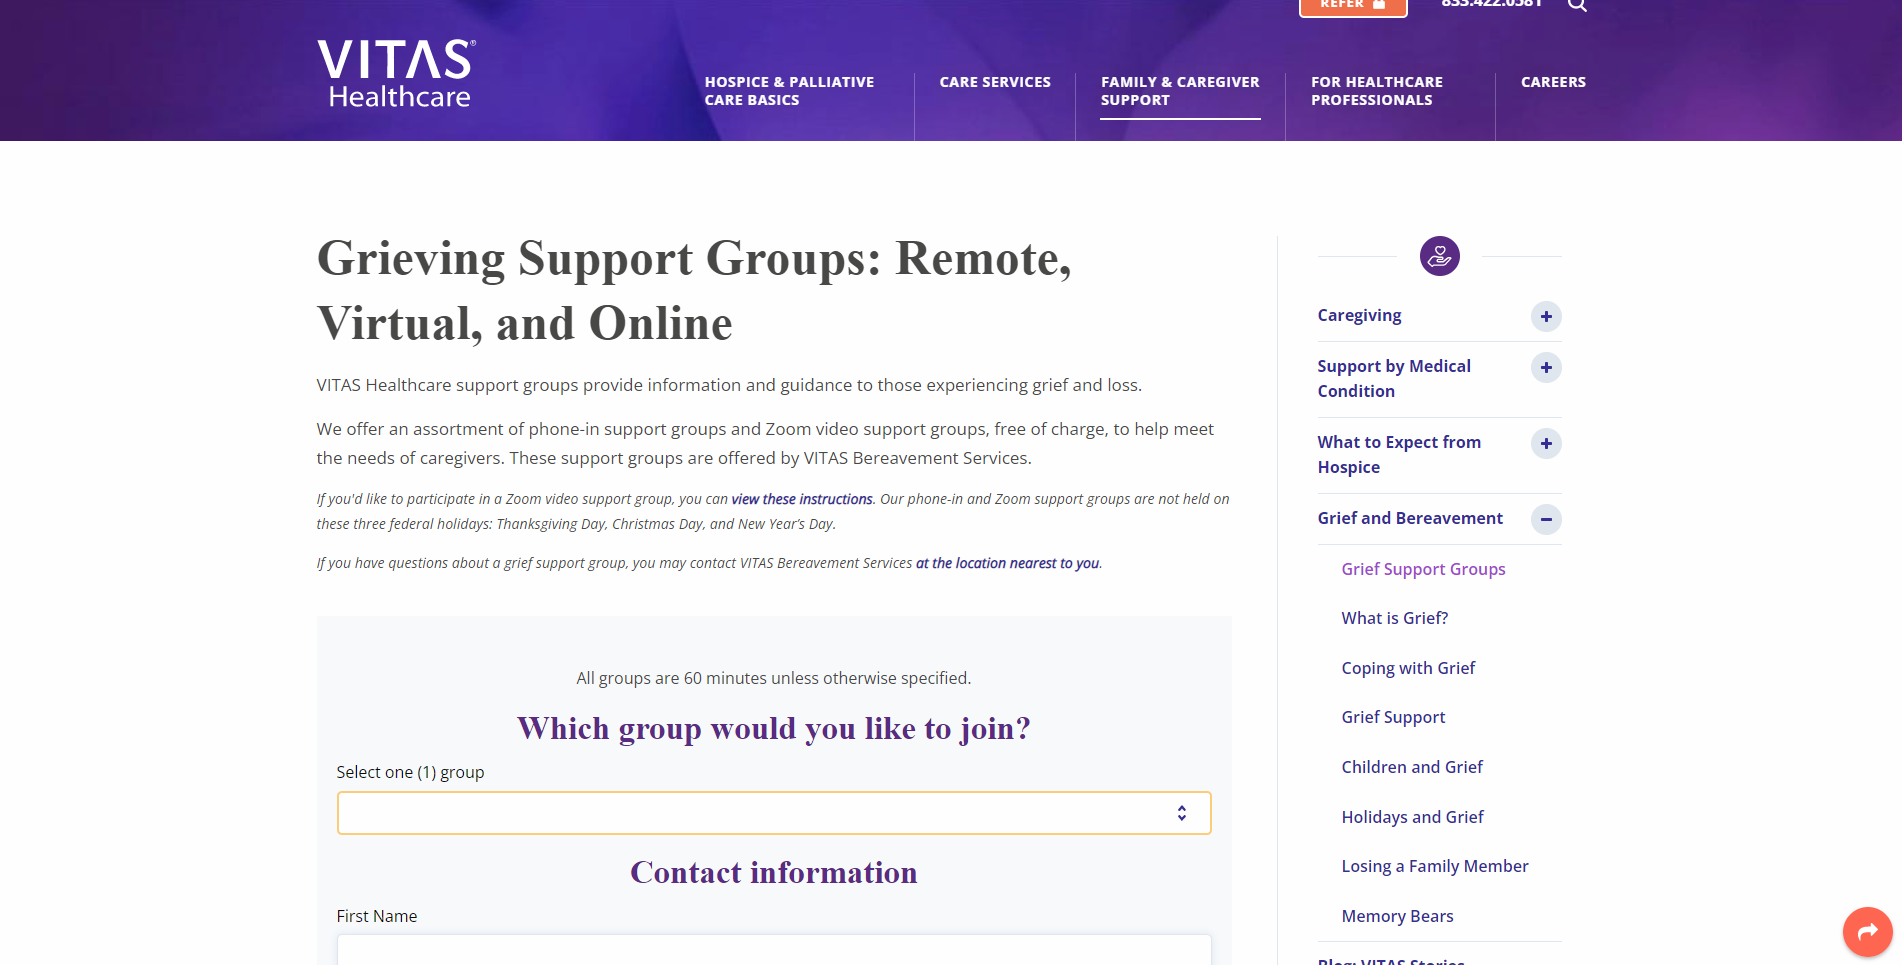 Grieving Support Groups: Remote, Virtual, and Online